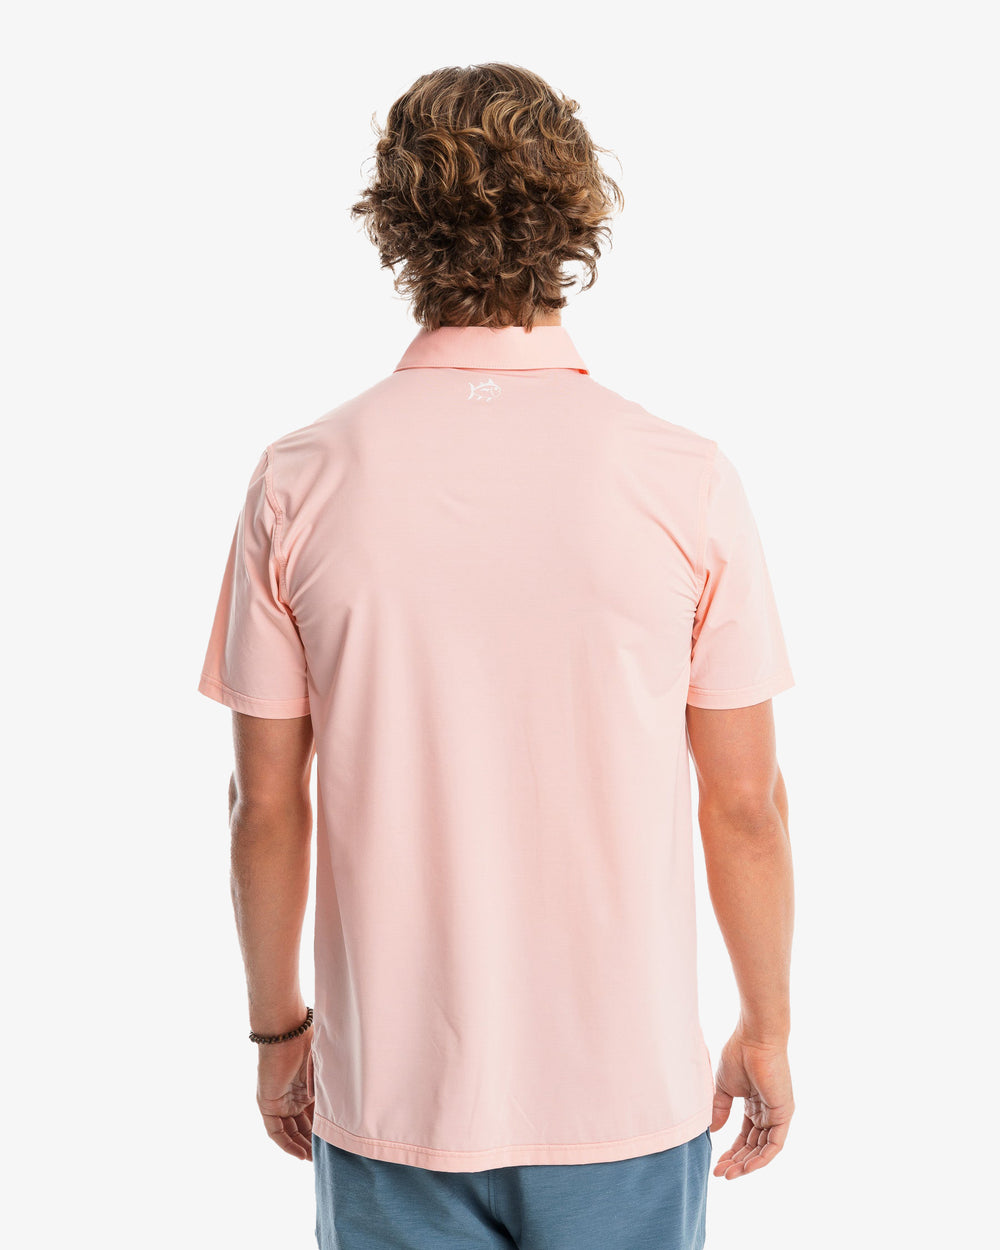 The model back view of the Men's Sawgrass Stripe brrr°®-eeze Performance Polo Shirt by Southern Tide - Sunbaked Sand